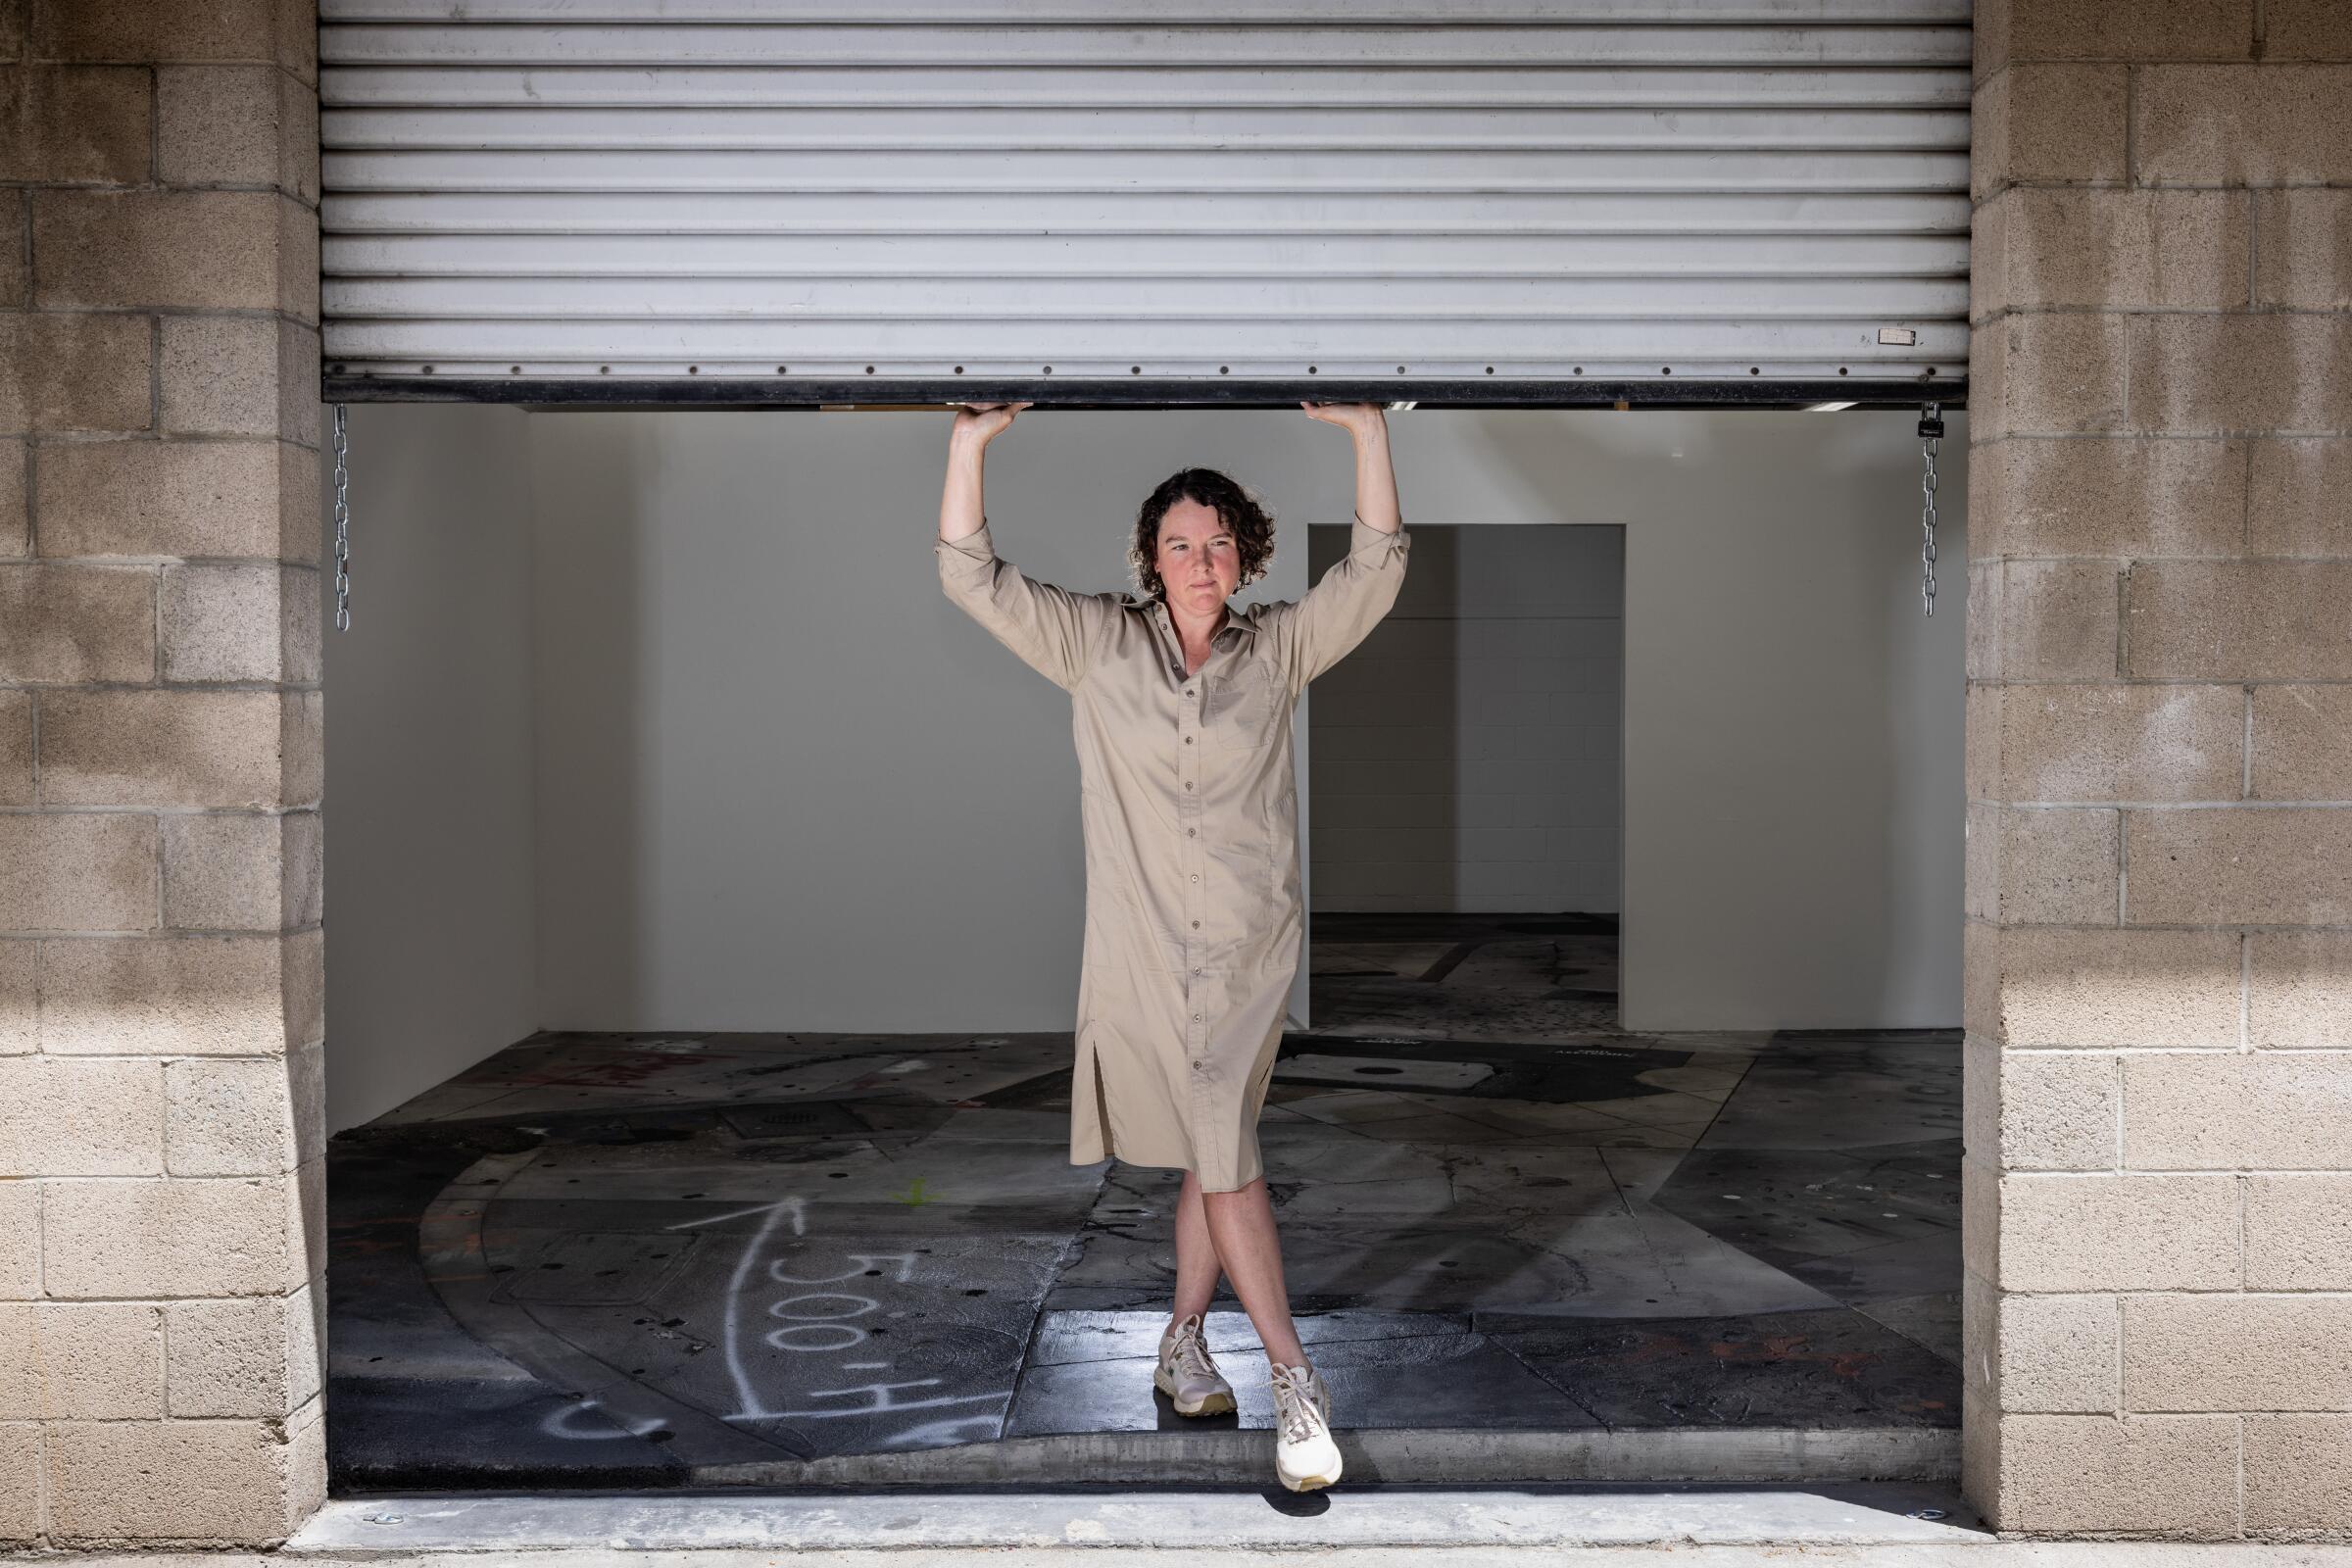 A woman stands with her arms up as if holding up the roll-up garage door over her head.